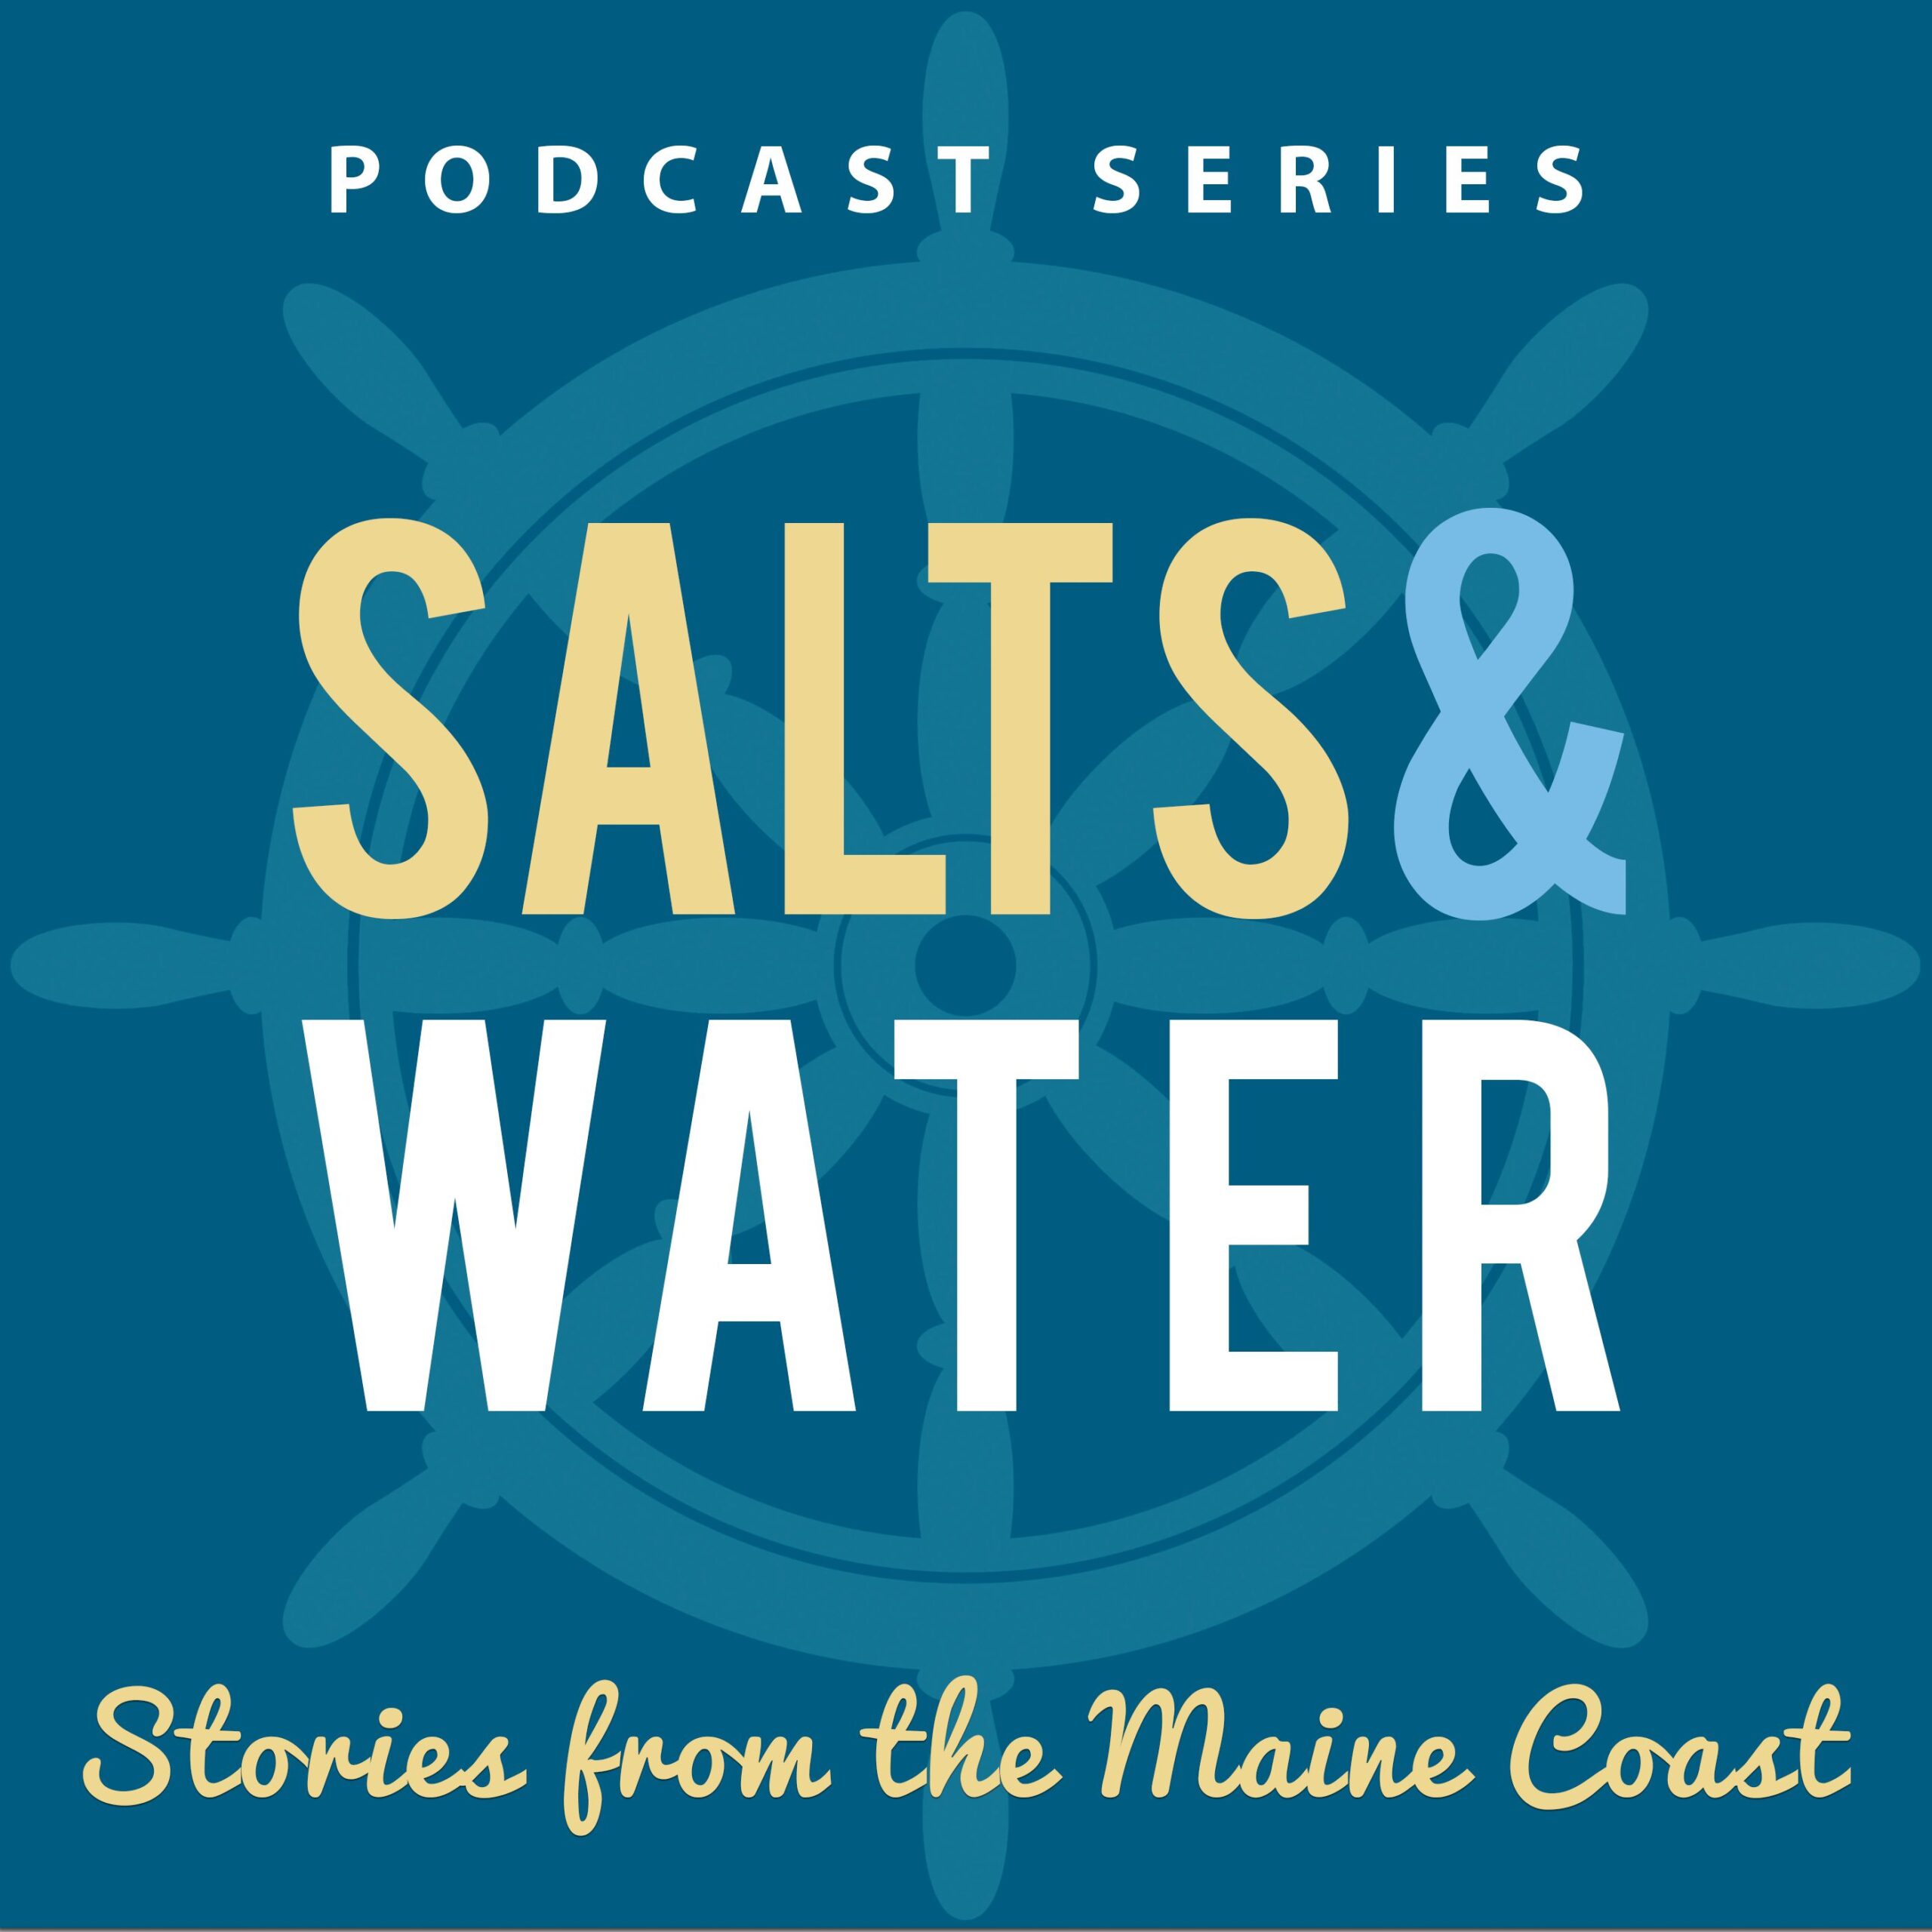 maine salts waters podcast tourismus